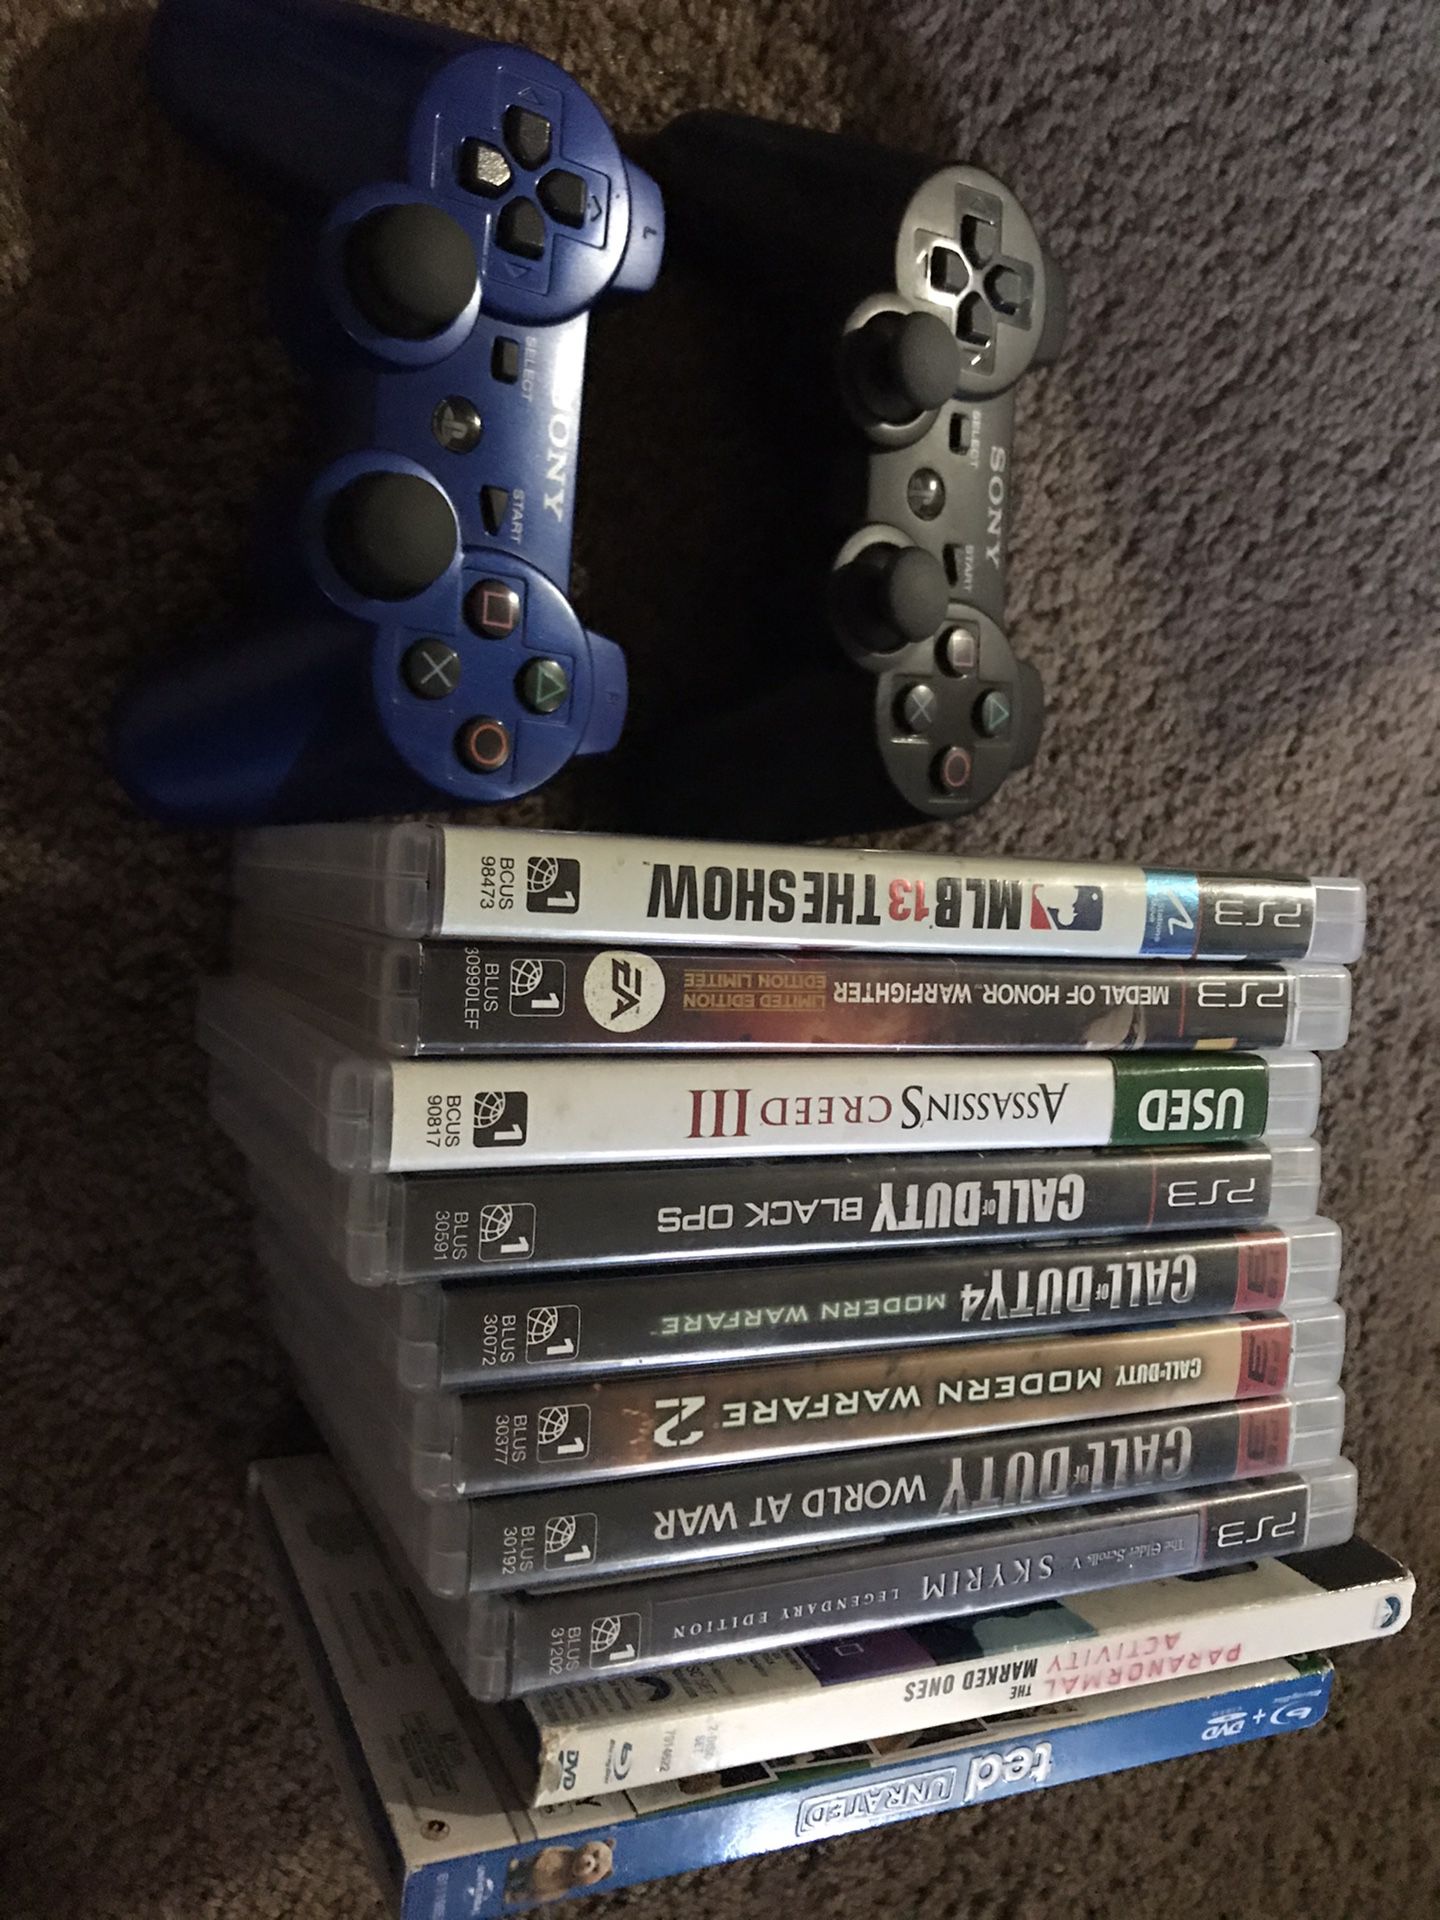 PS3 controllers and games